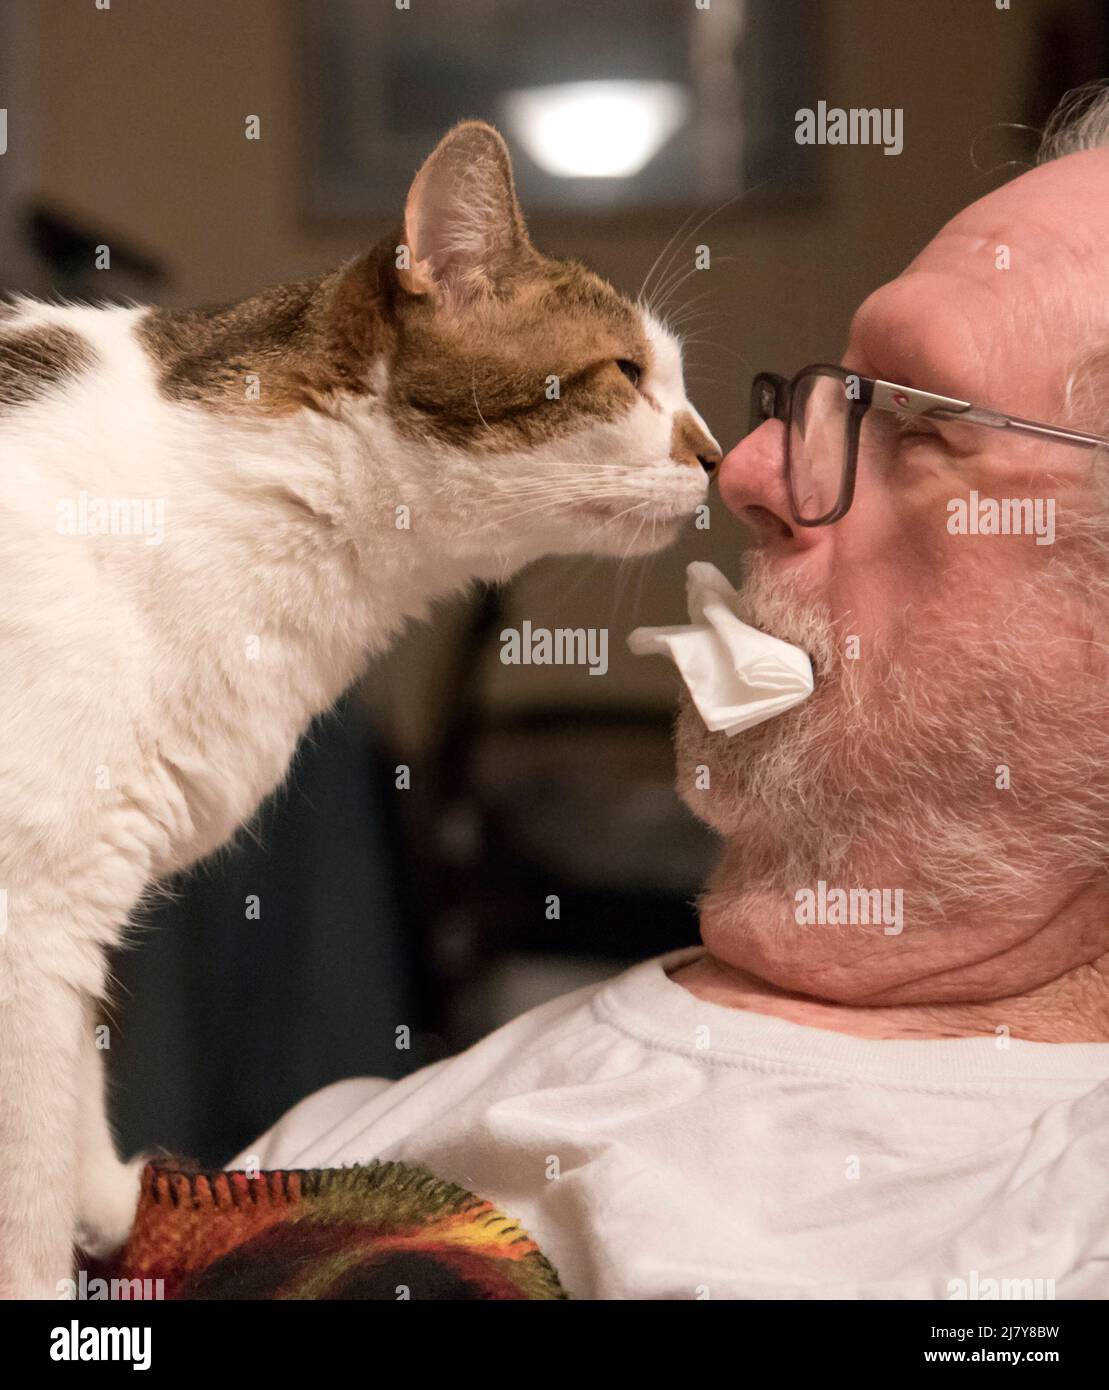 Missy the cat loves to touch the beard and face of her owner while relaxing in the recliner. Stock Photo